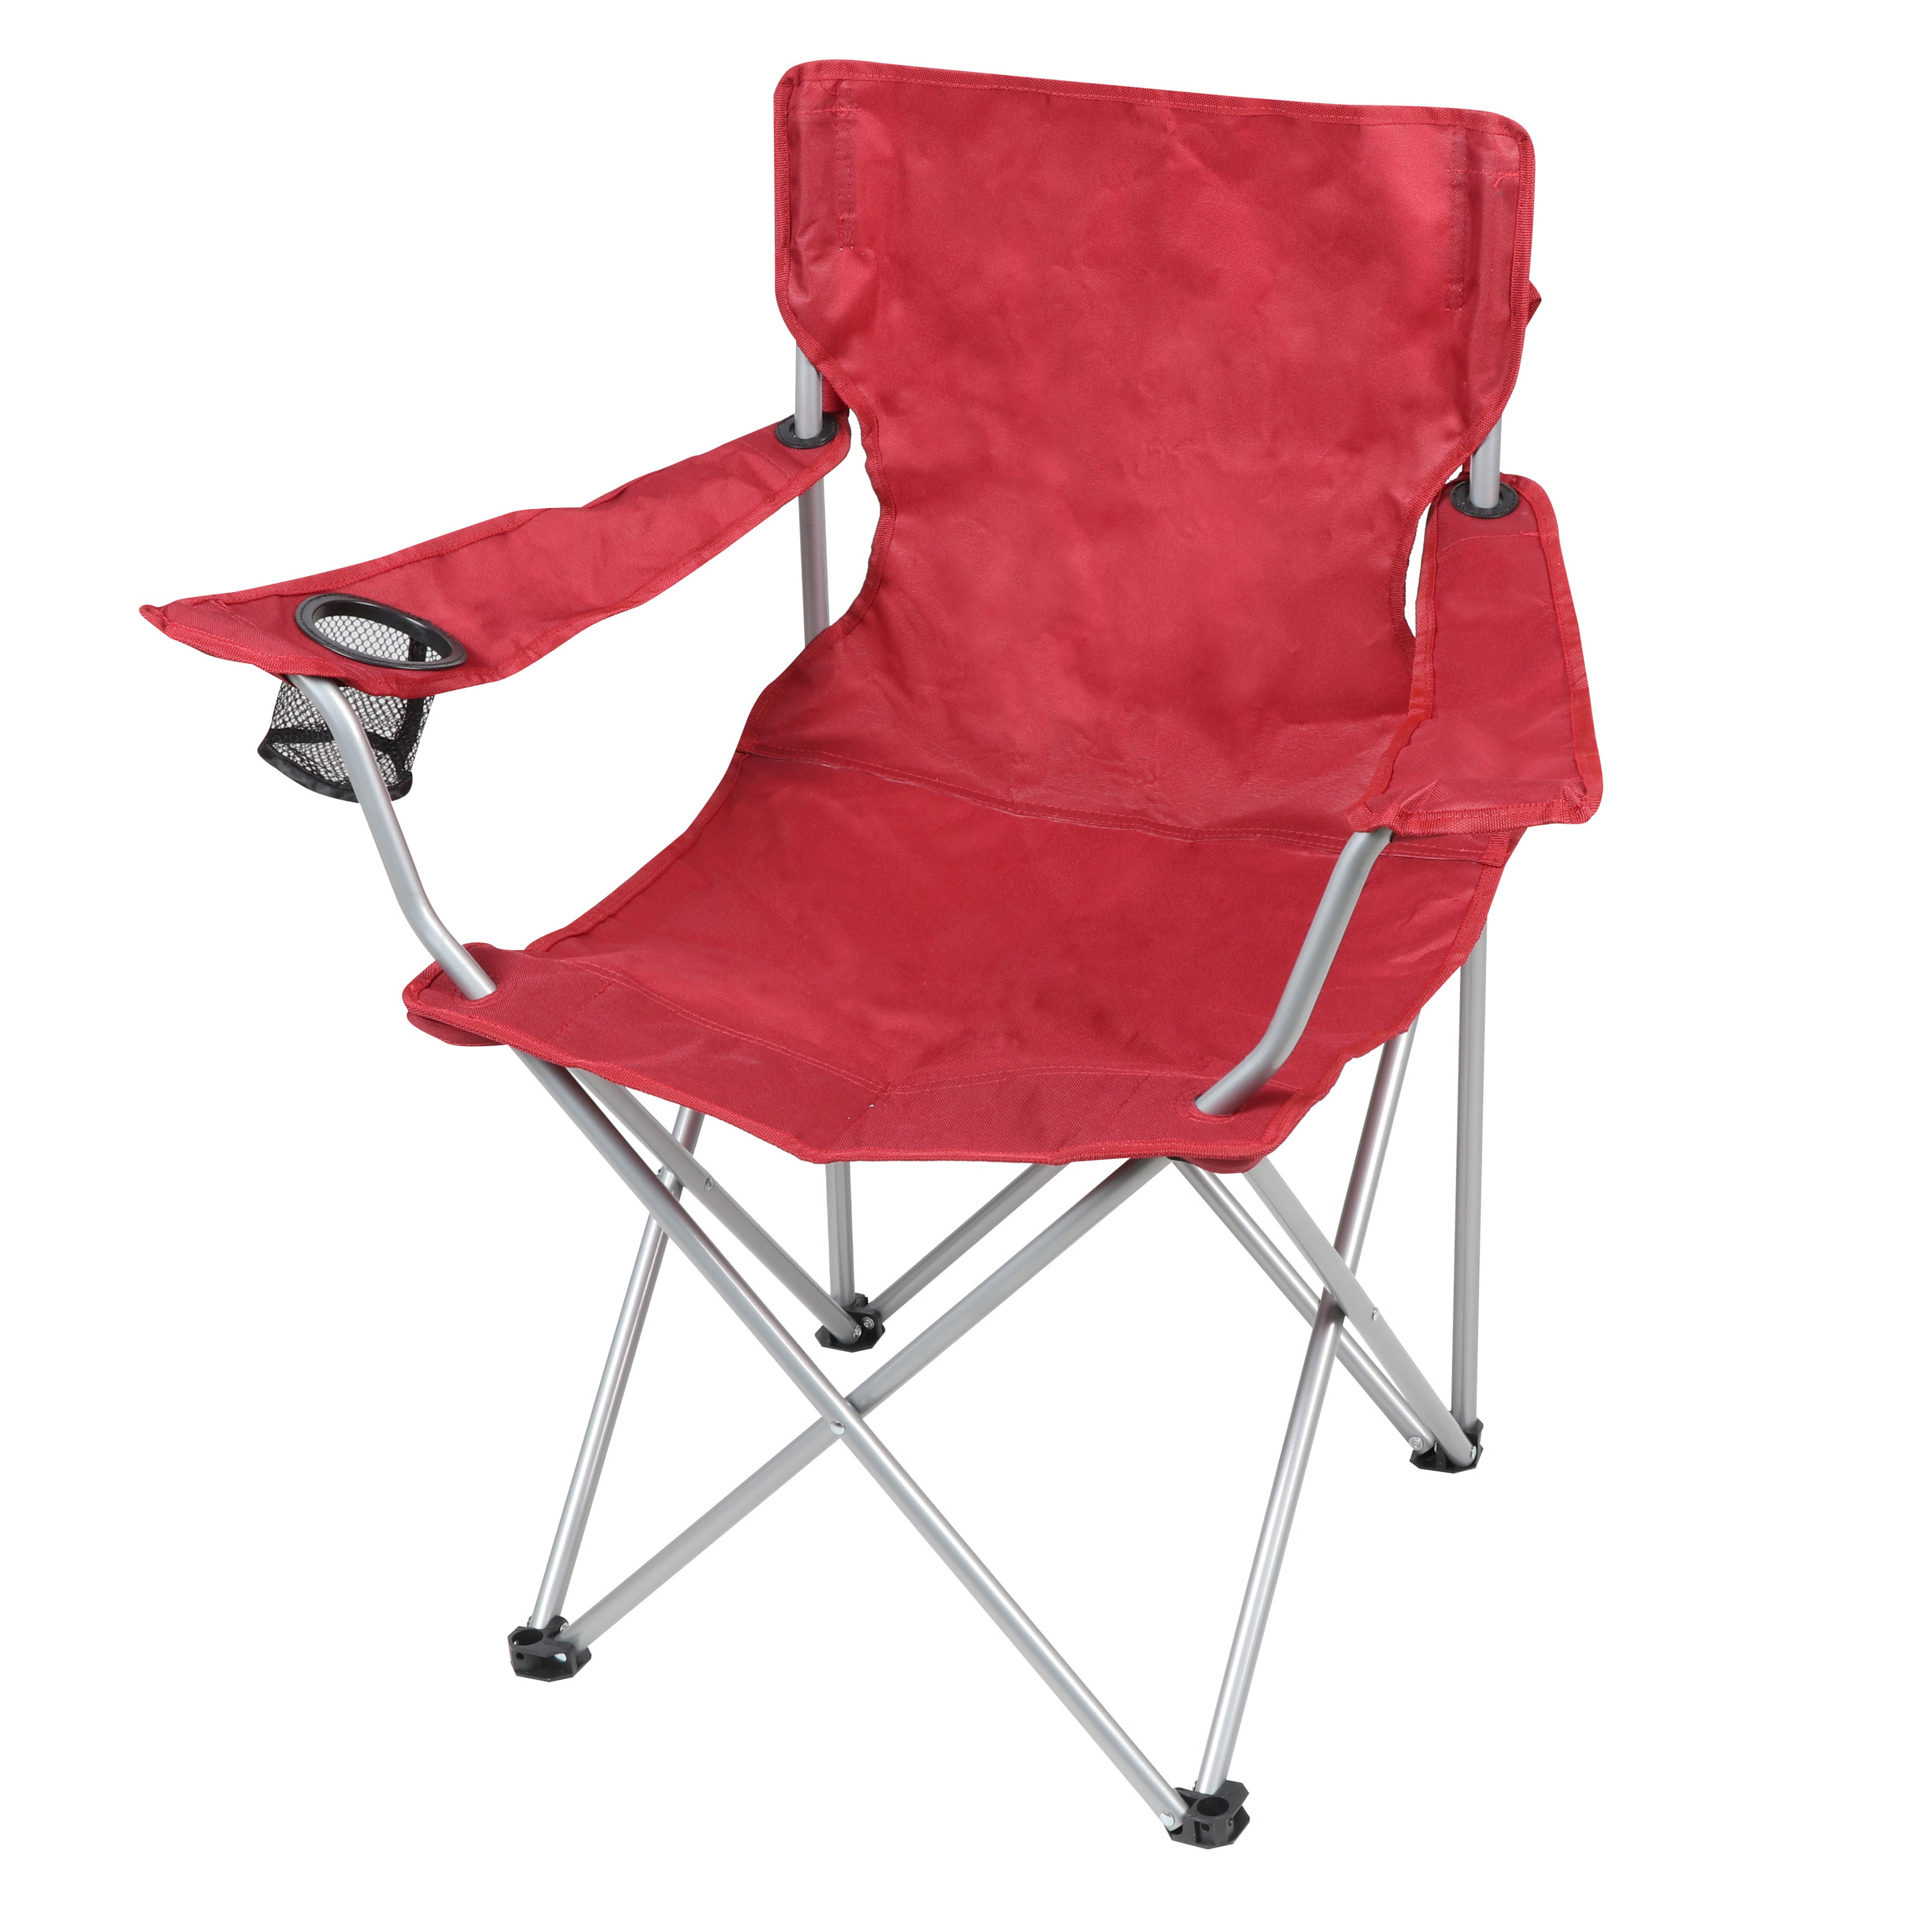 Ozark Trail Basic Quad Folding Camp Chair w/ Cup Holder (Red, Adult) $7.88 + Free PickUp at Walmart or Free S&H w/ Walmart+ or $35+